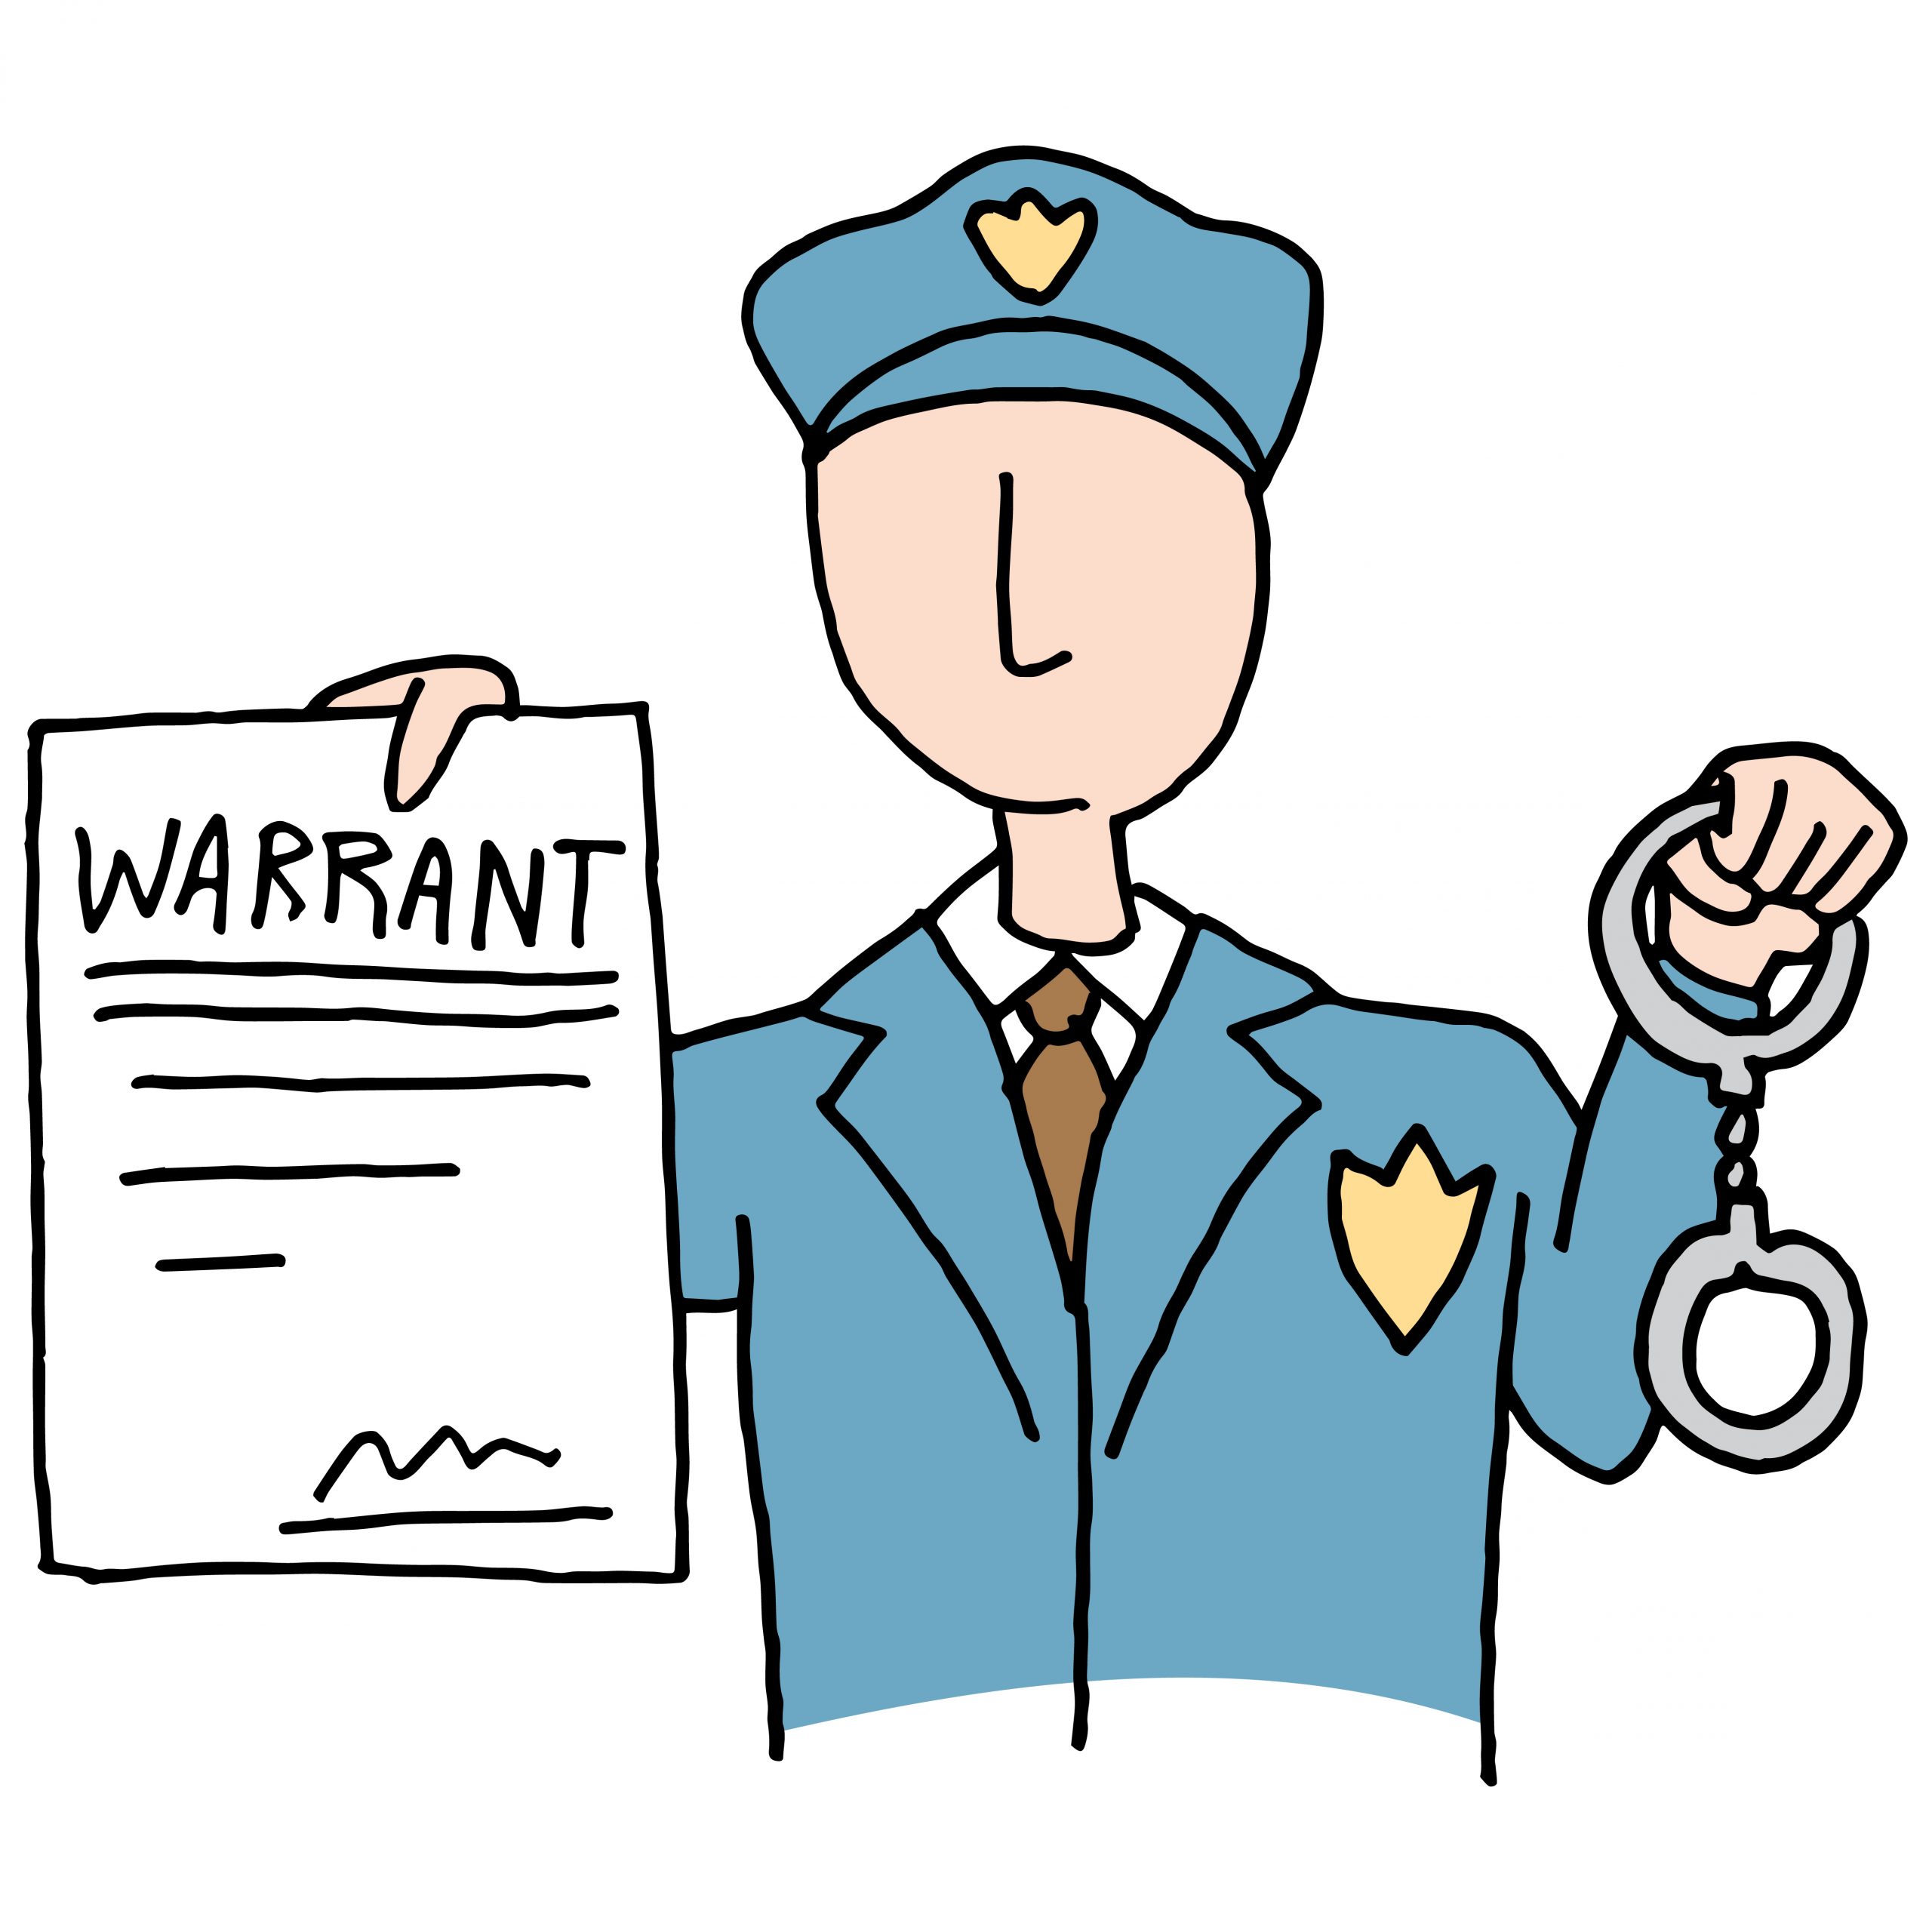 Do You Have a Warrant Out in St. Paul?